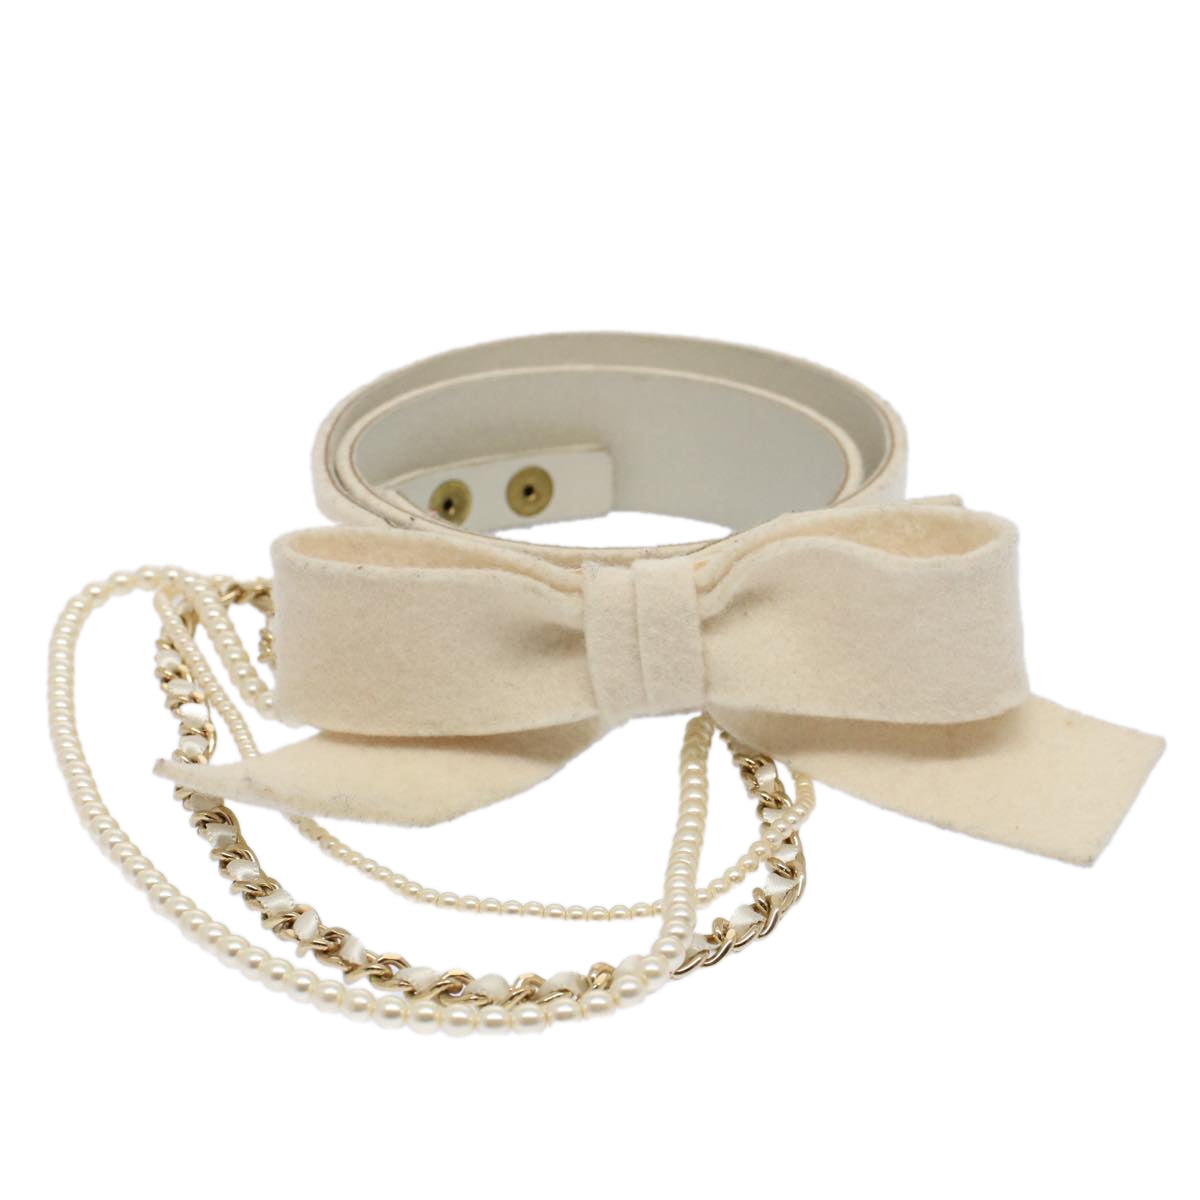 CHANEL Pearl Belt Wool 80/32 37.4"" White CC Auth bs9177